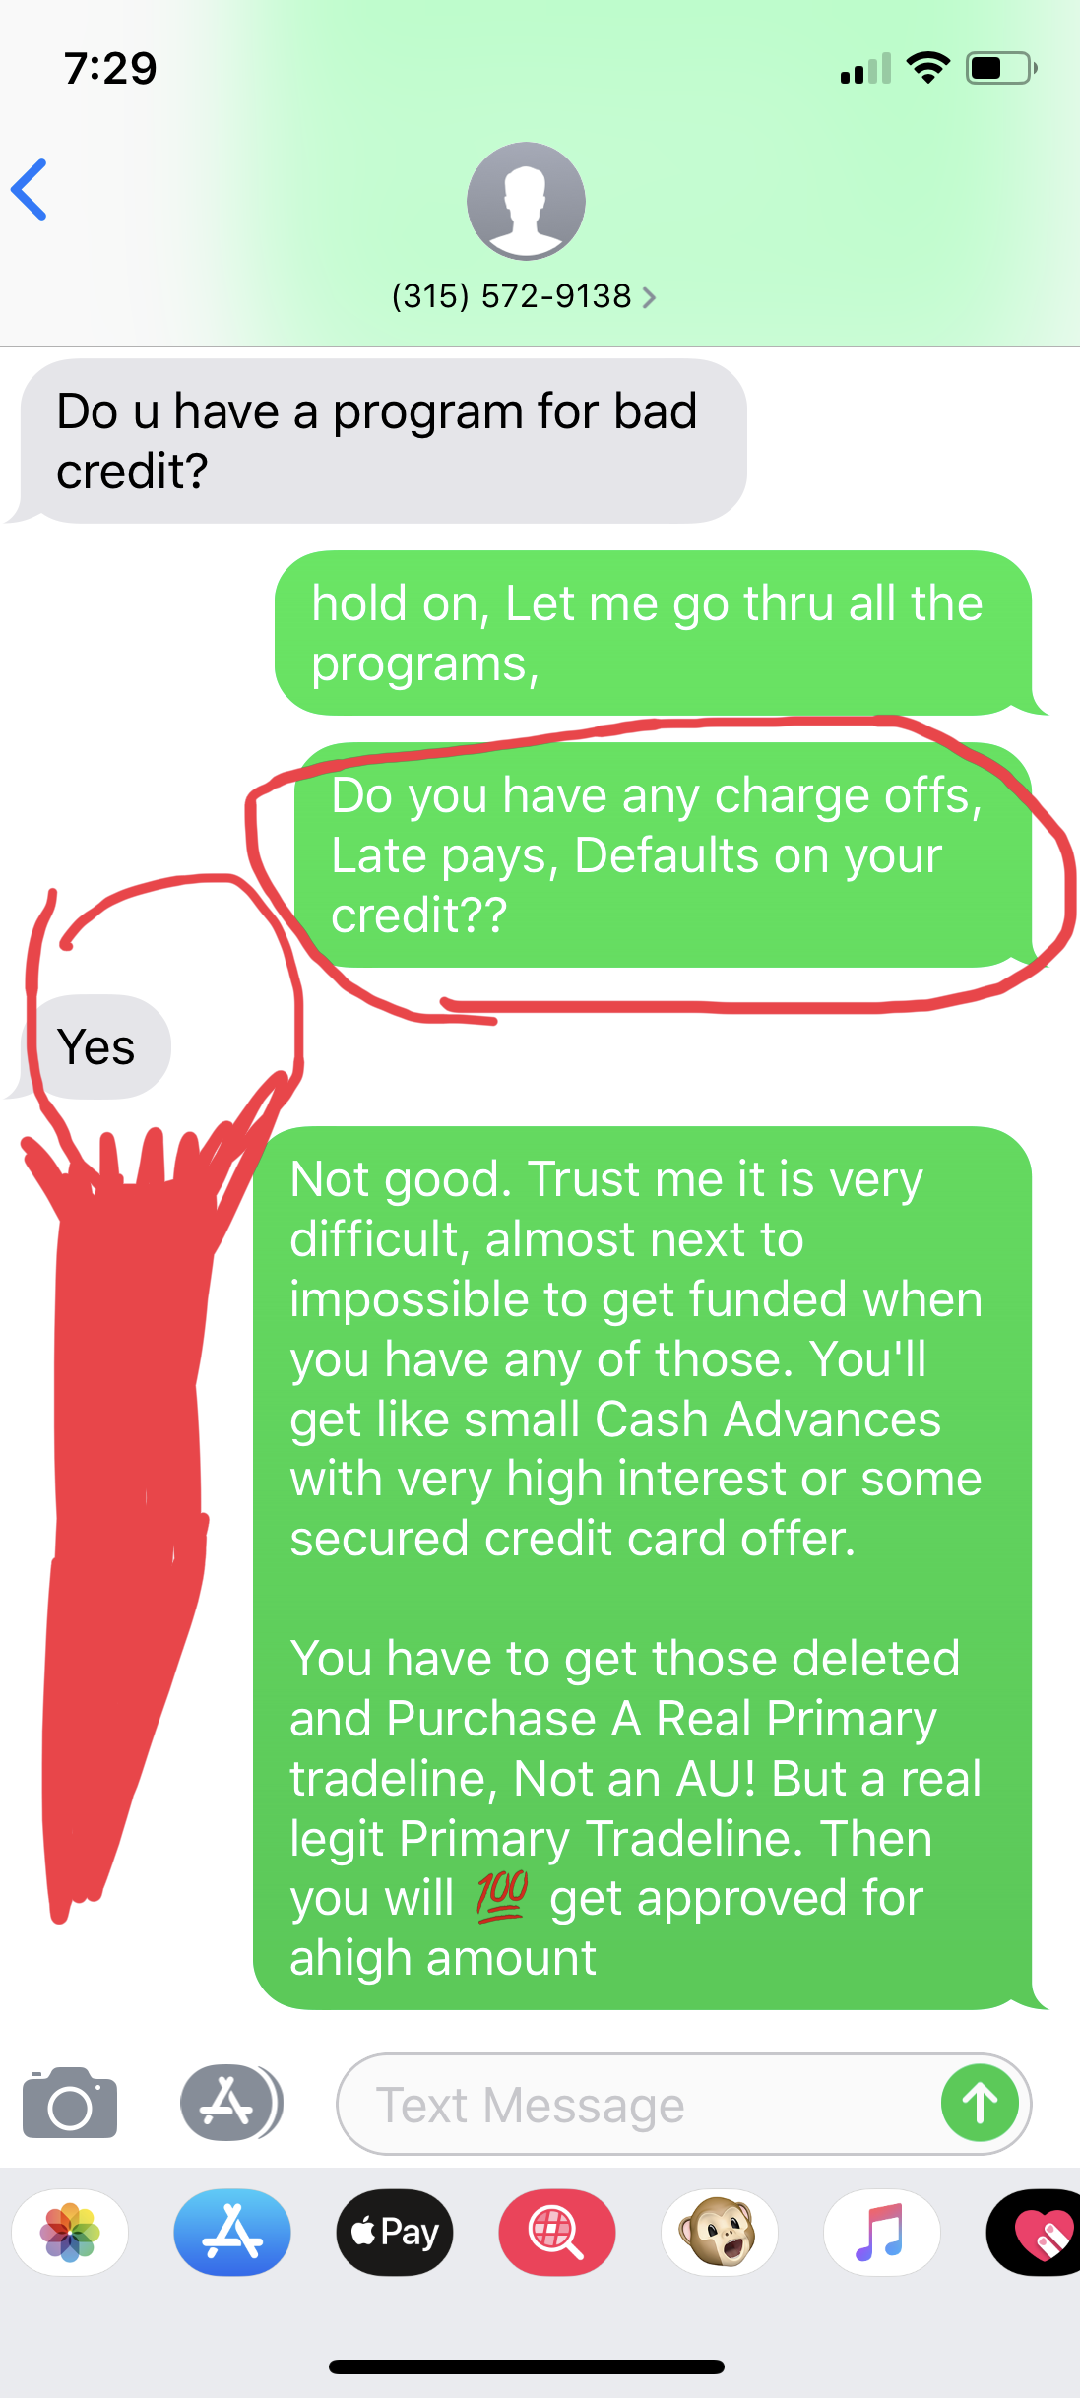 Bad Credit client continued